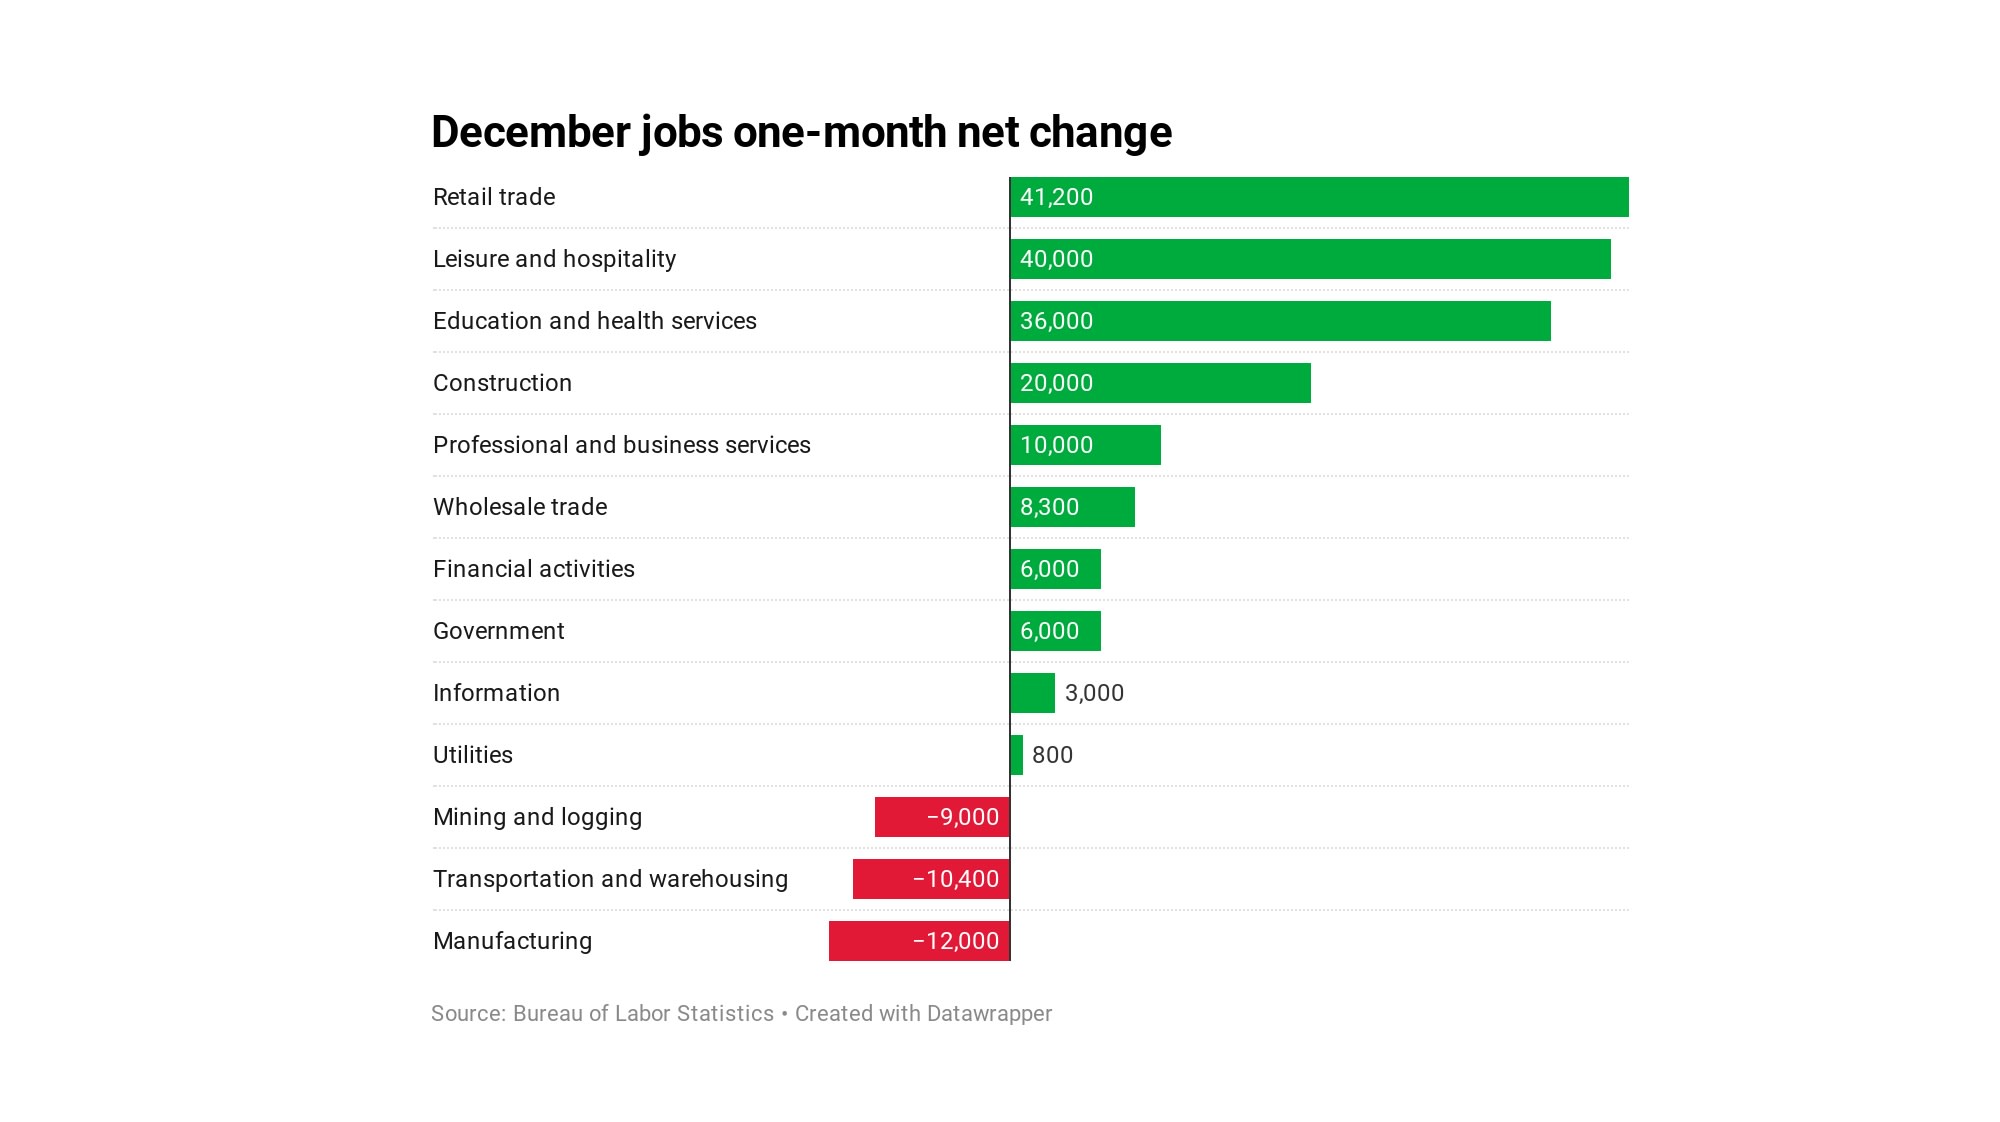 Here is the place the roles are for December 2019 — in a single chart